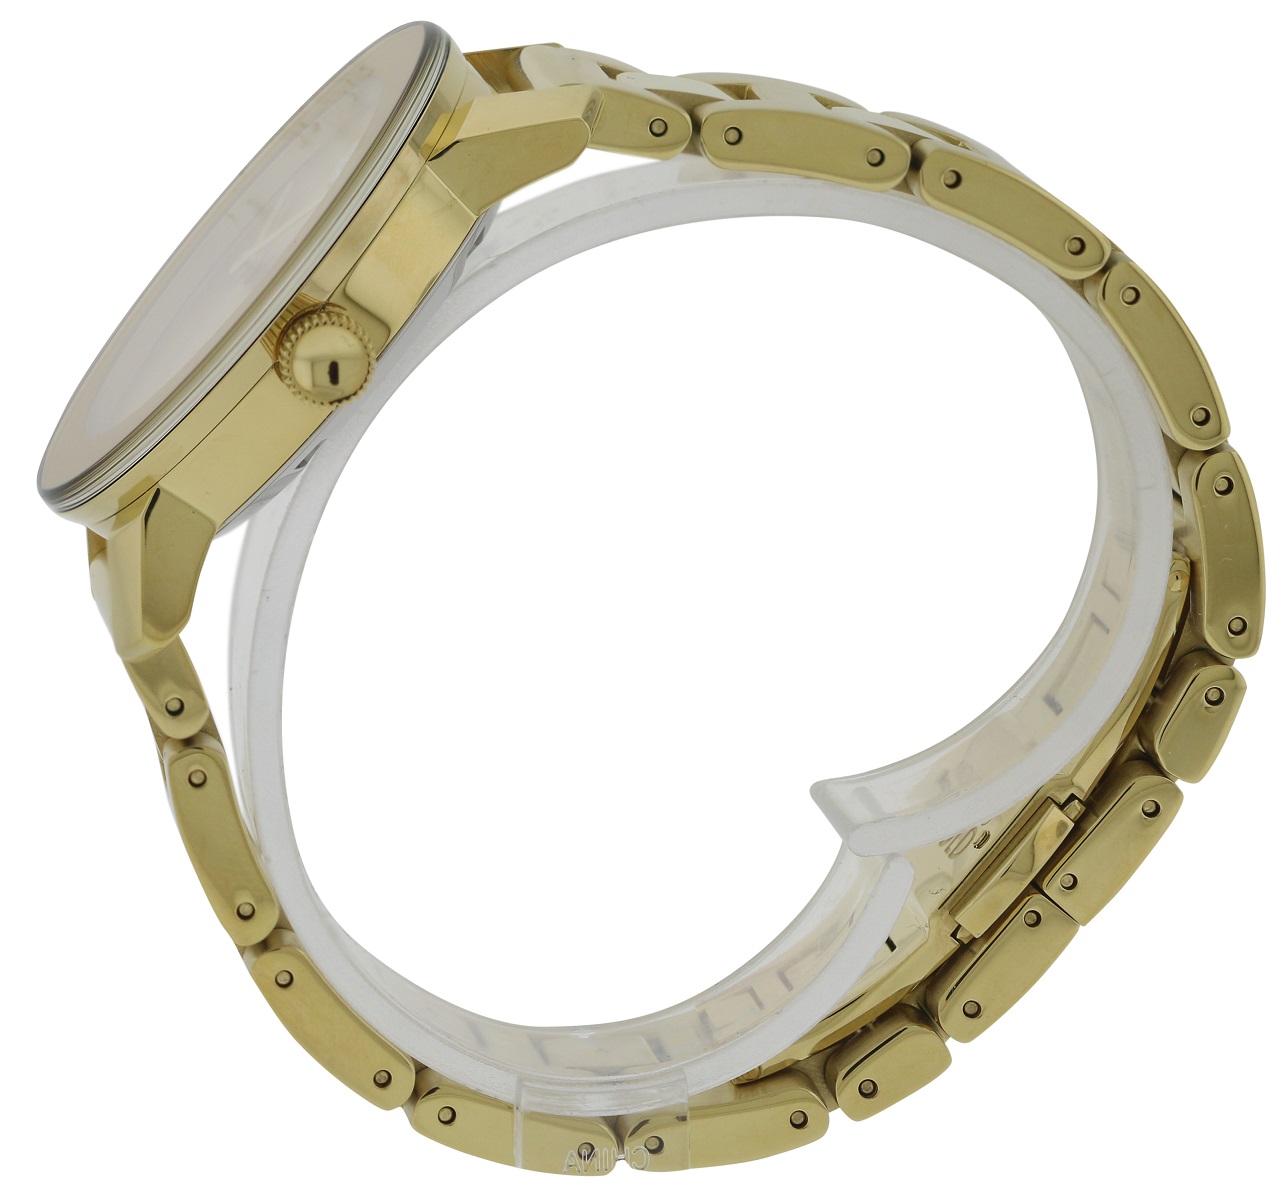 Movado Bold Gold Ion Watch 3600104